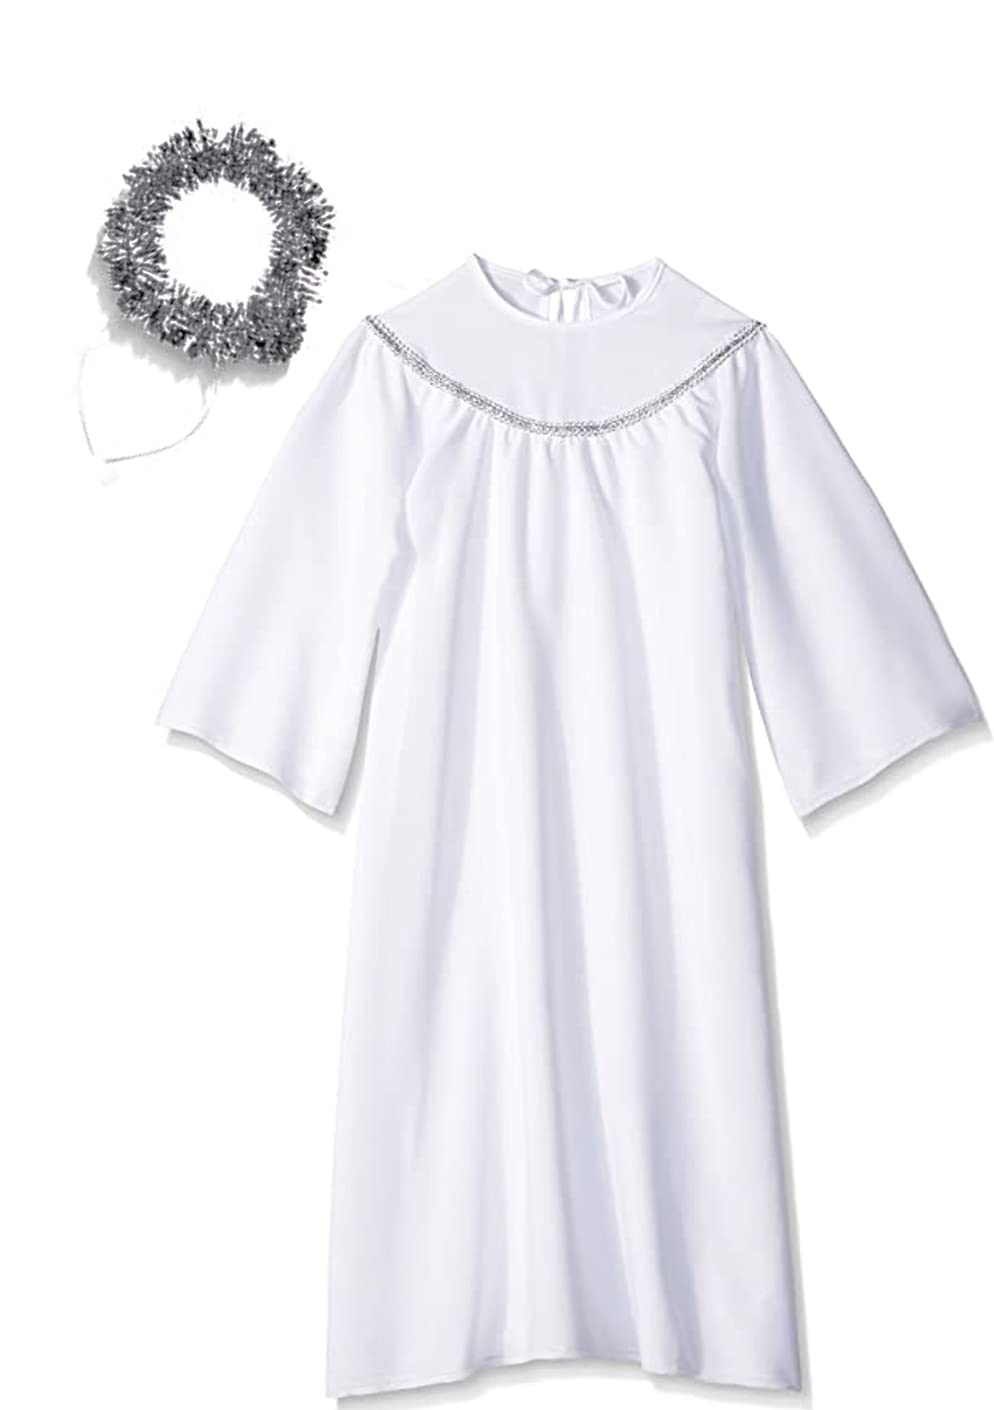 Skeleteen Angel Costume with Halo - Long White Angelic Gown with Silver Heavenly Halo Headband for Children&#x27;s Costumes